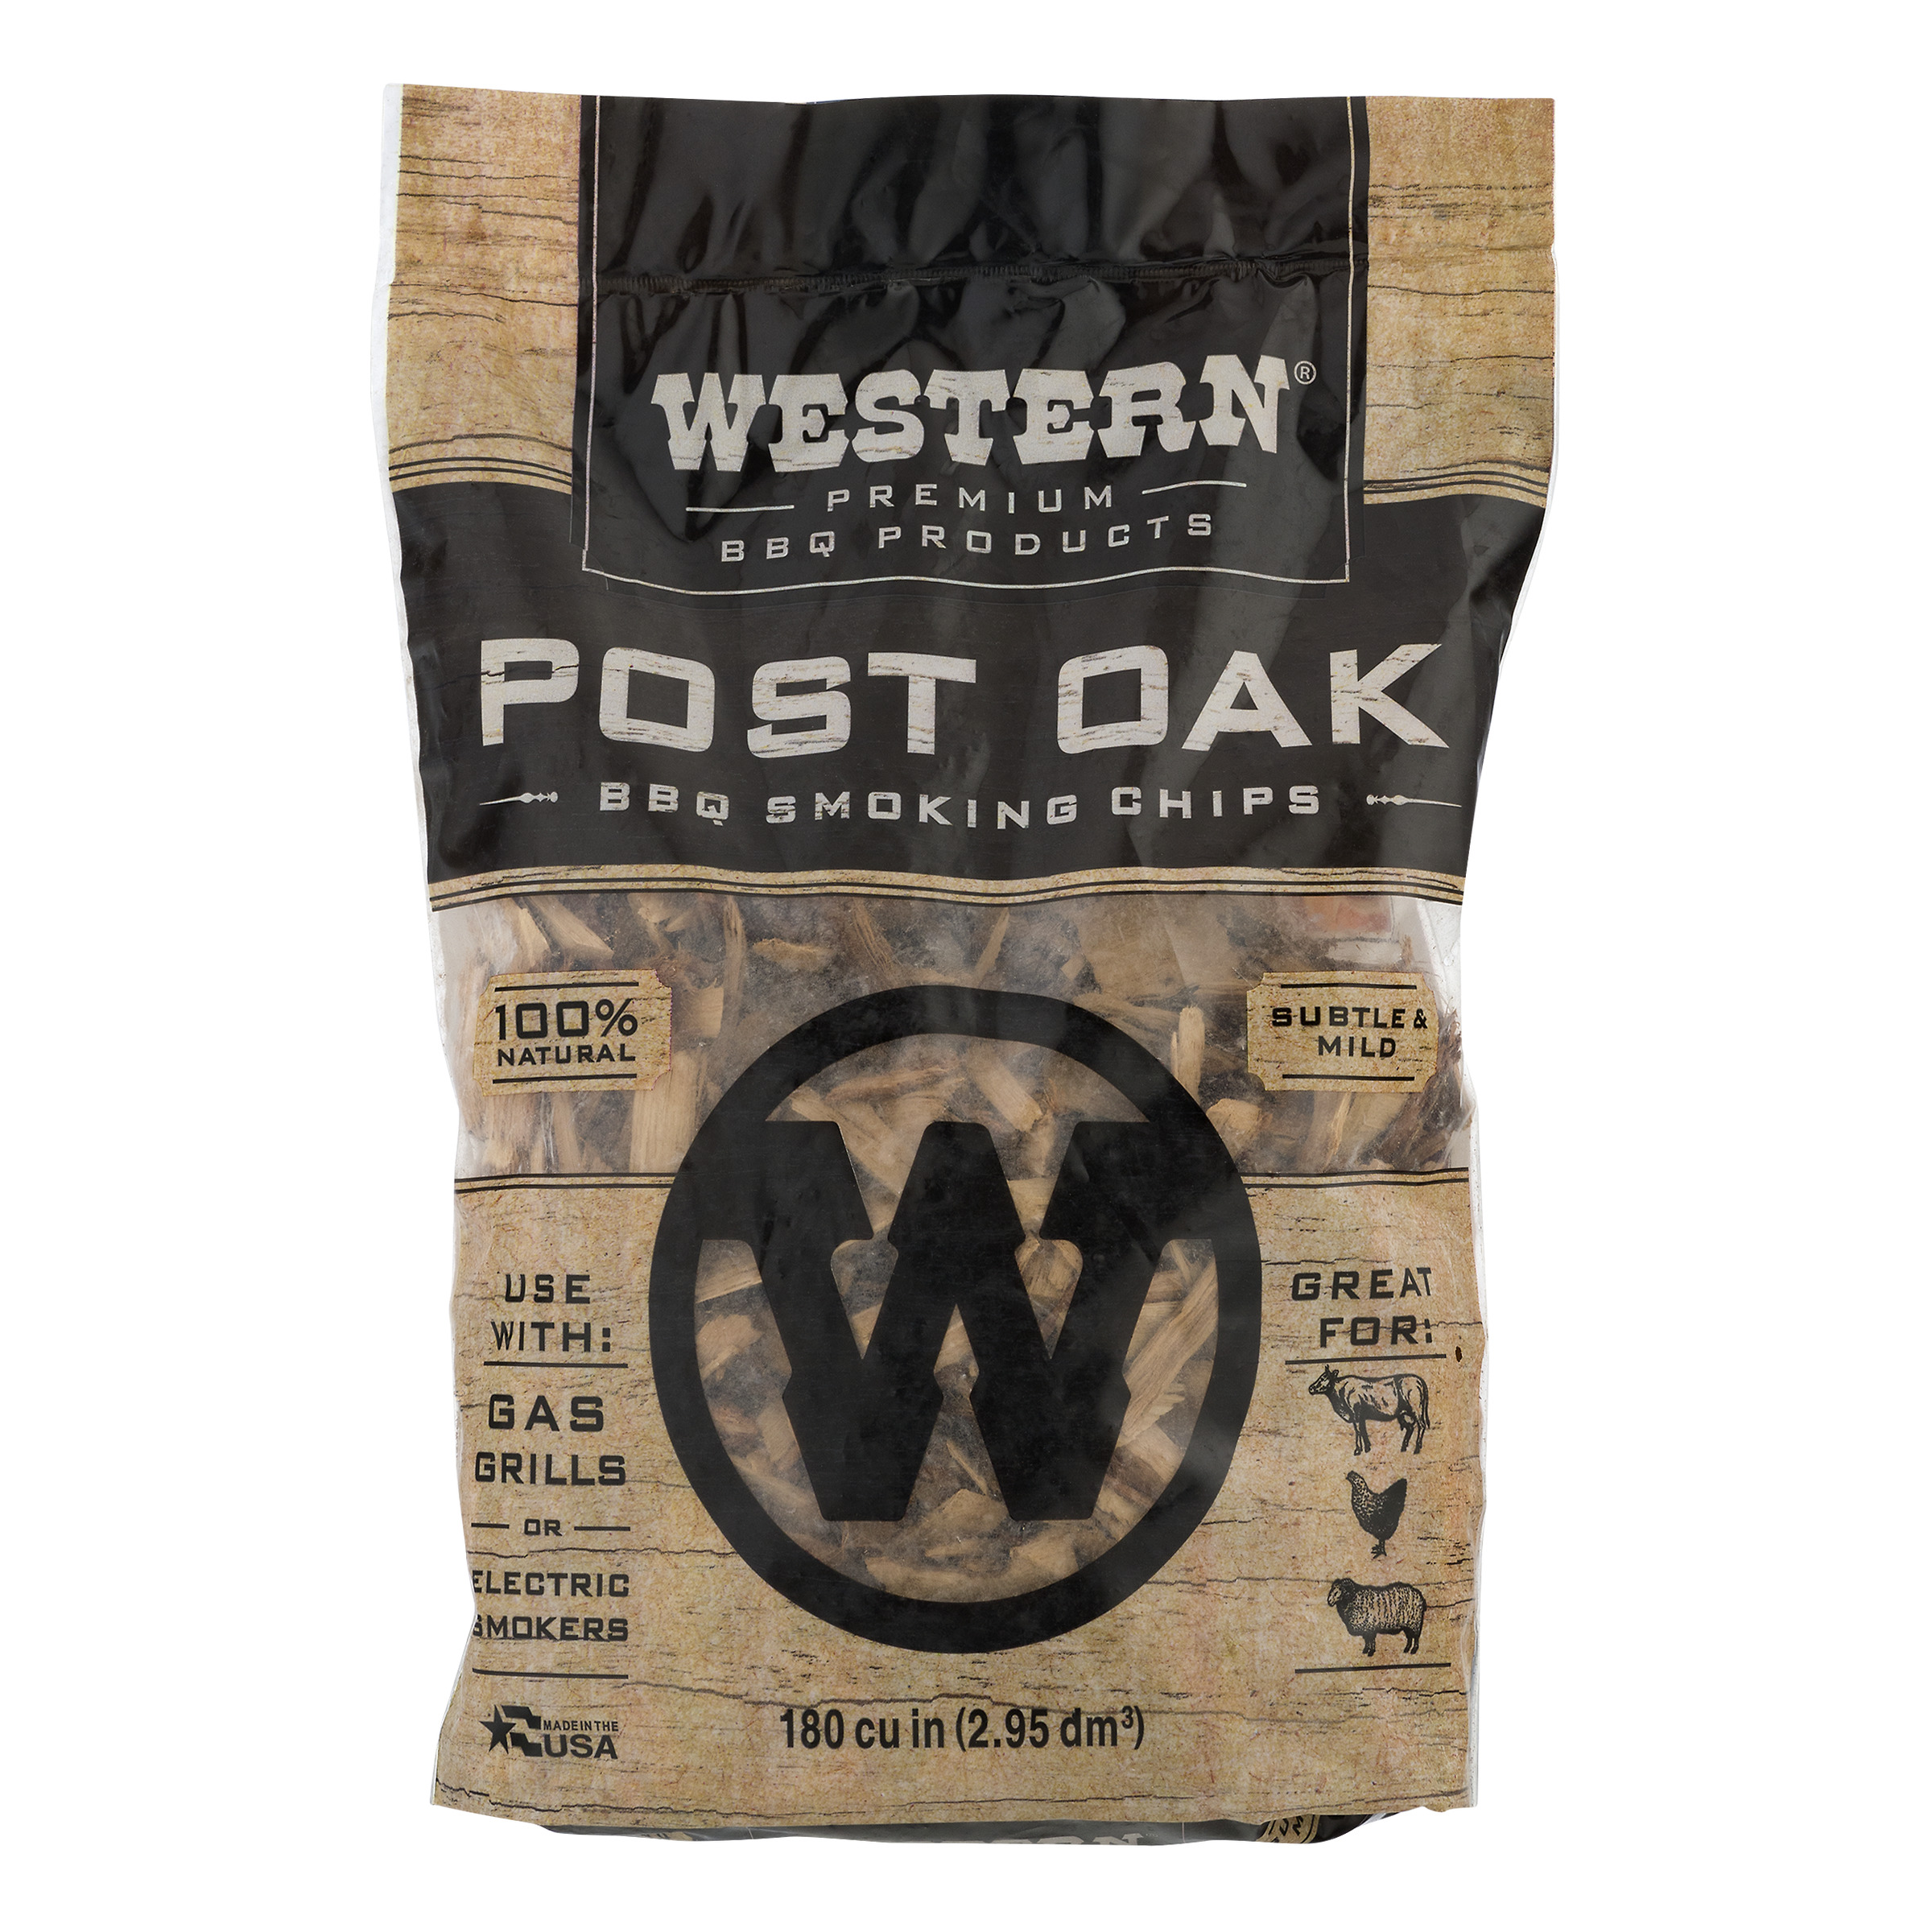 Western Premium BBQ Products Oak BBQ Smoking Chips, 180 Cu in - image 1 of 10